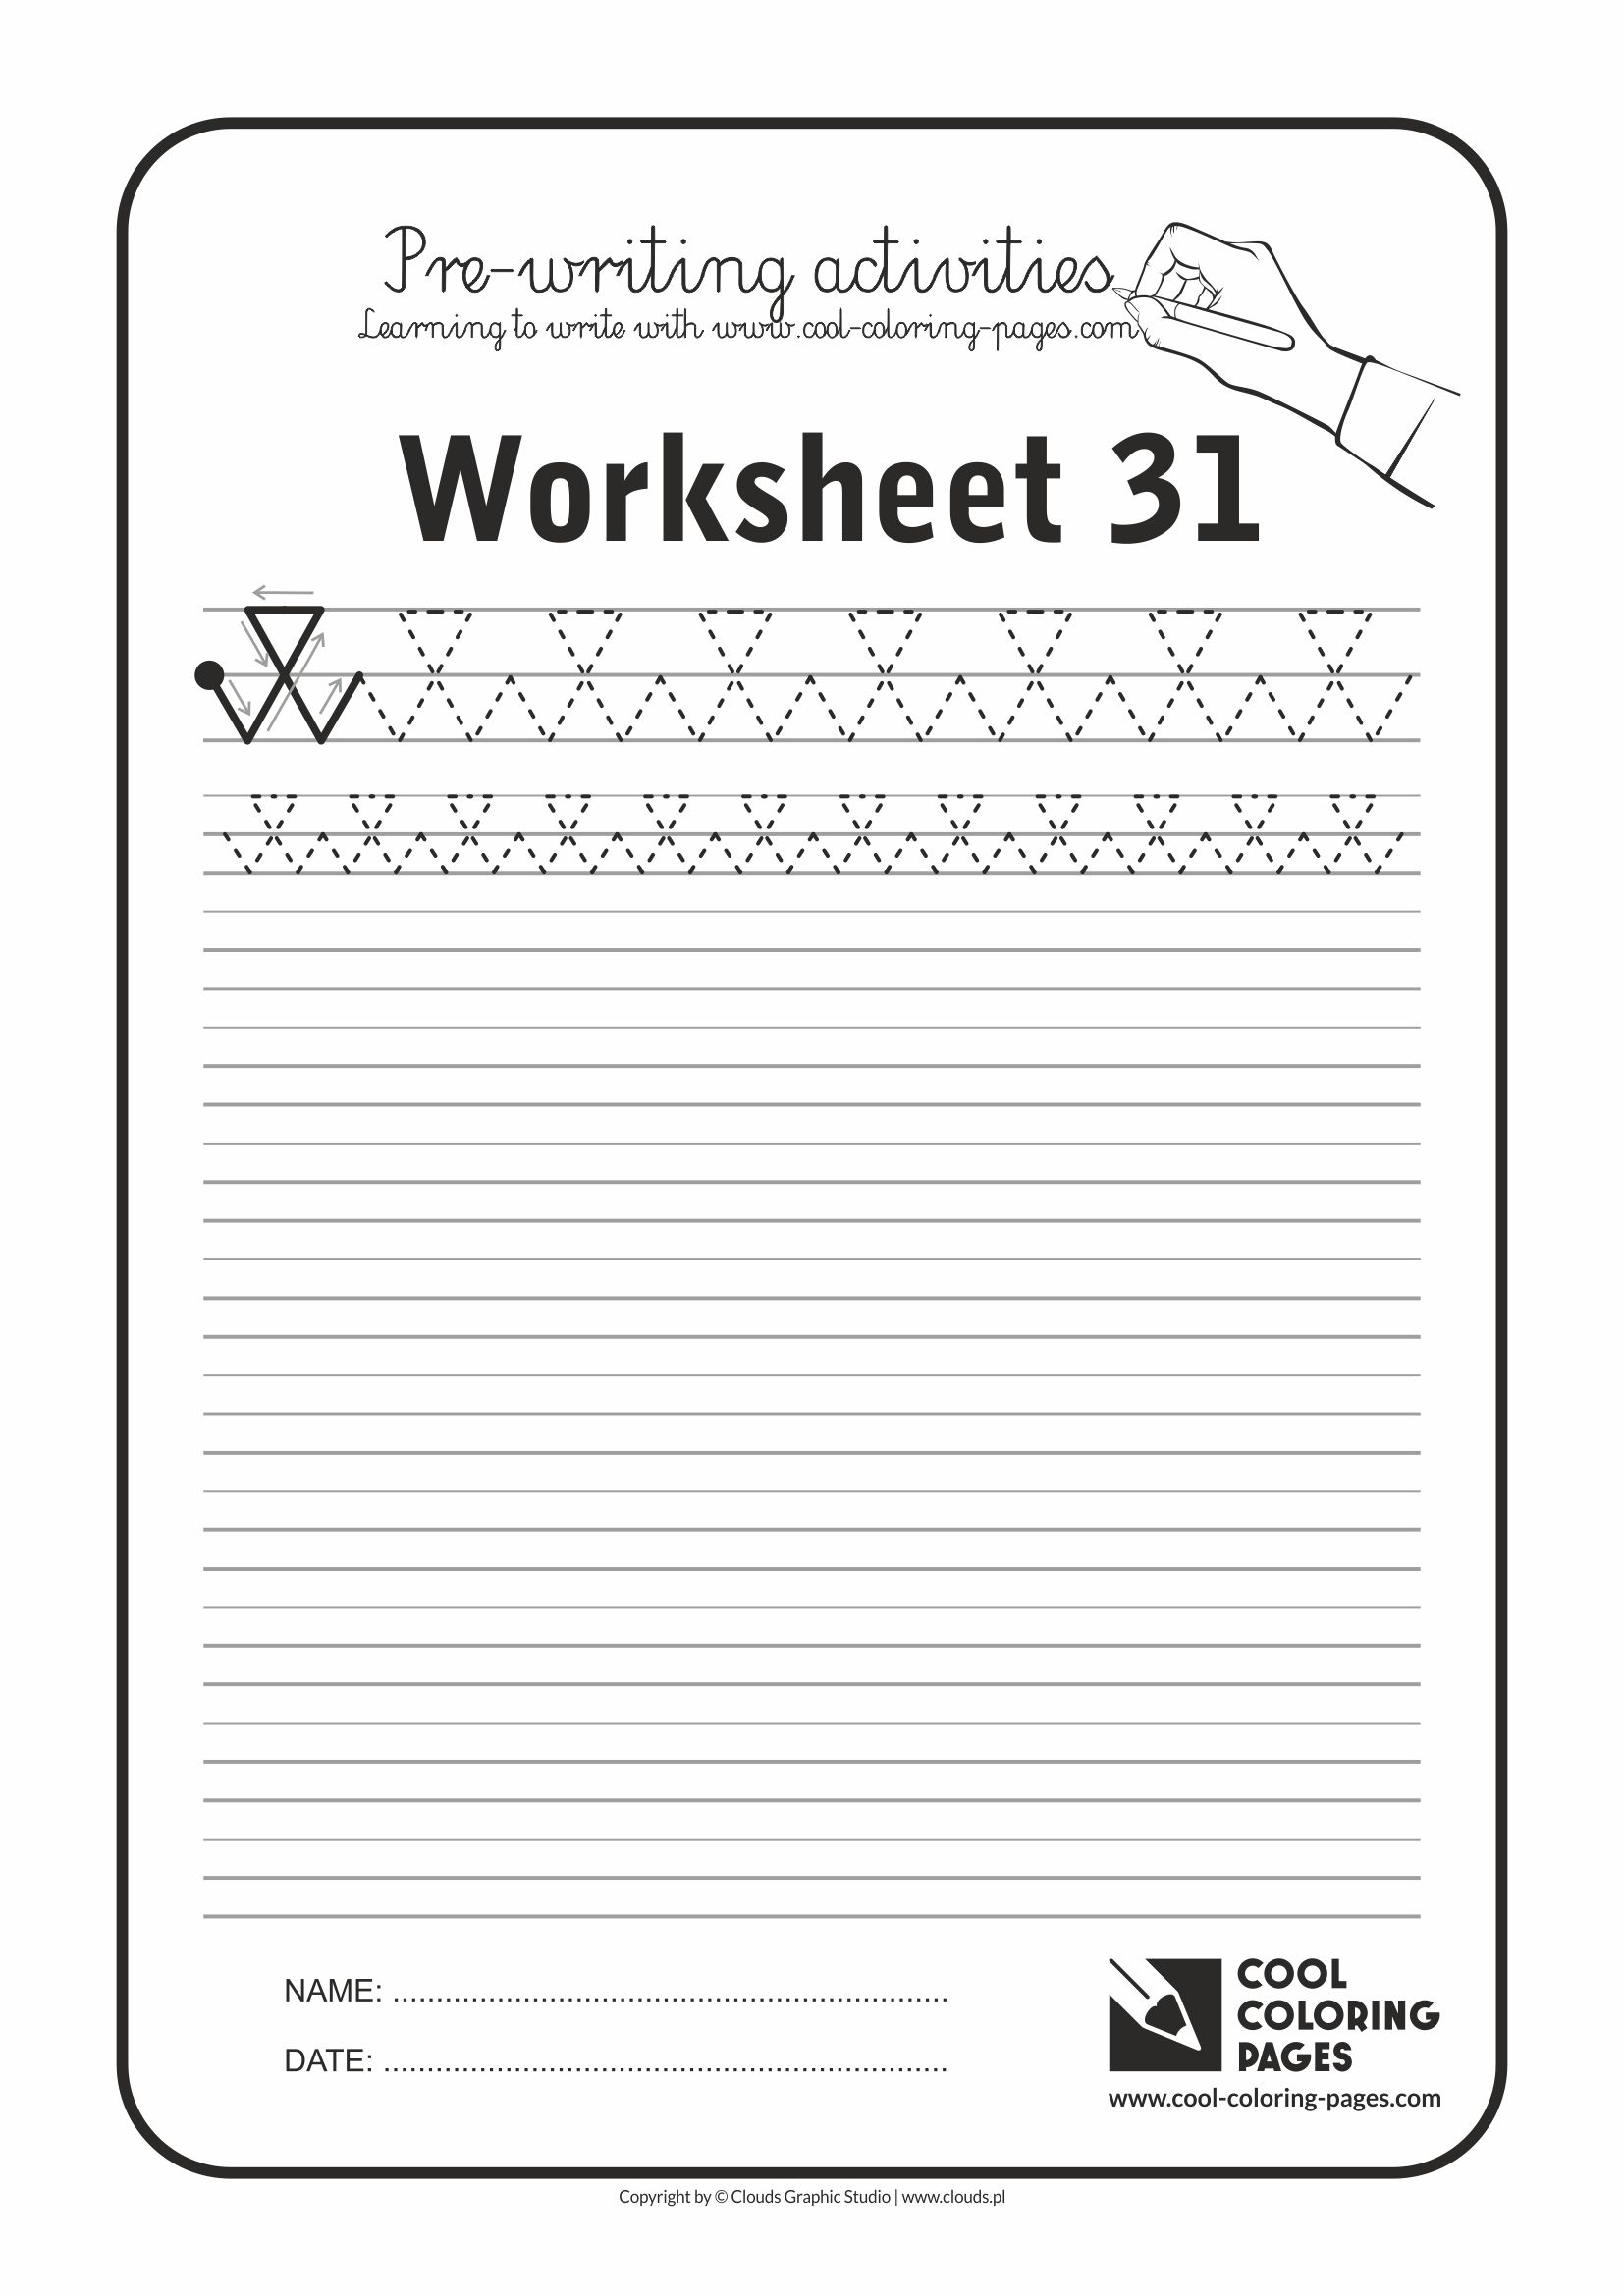 Cool Coloring Pages / Pre-writing activities / Worksheet no.31